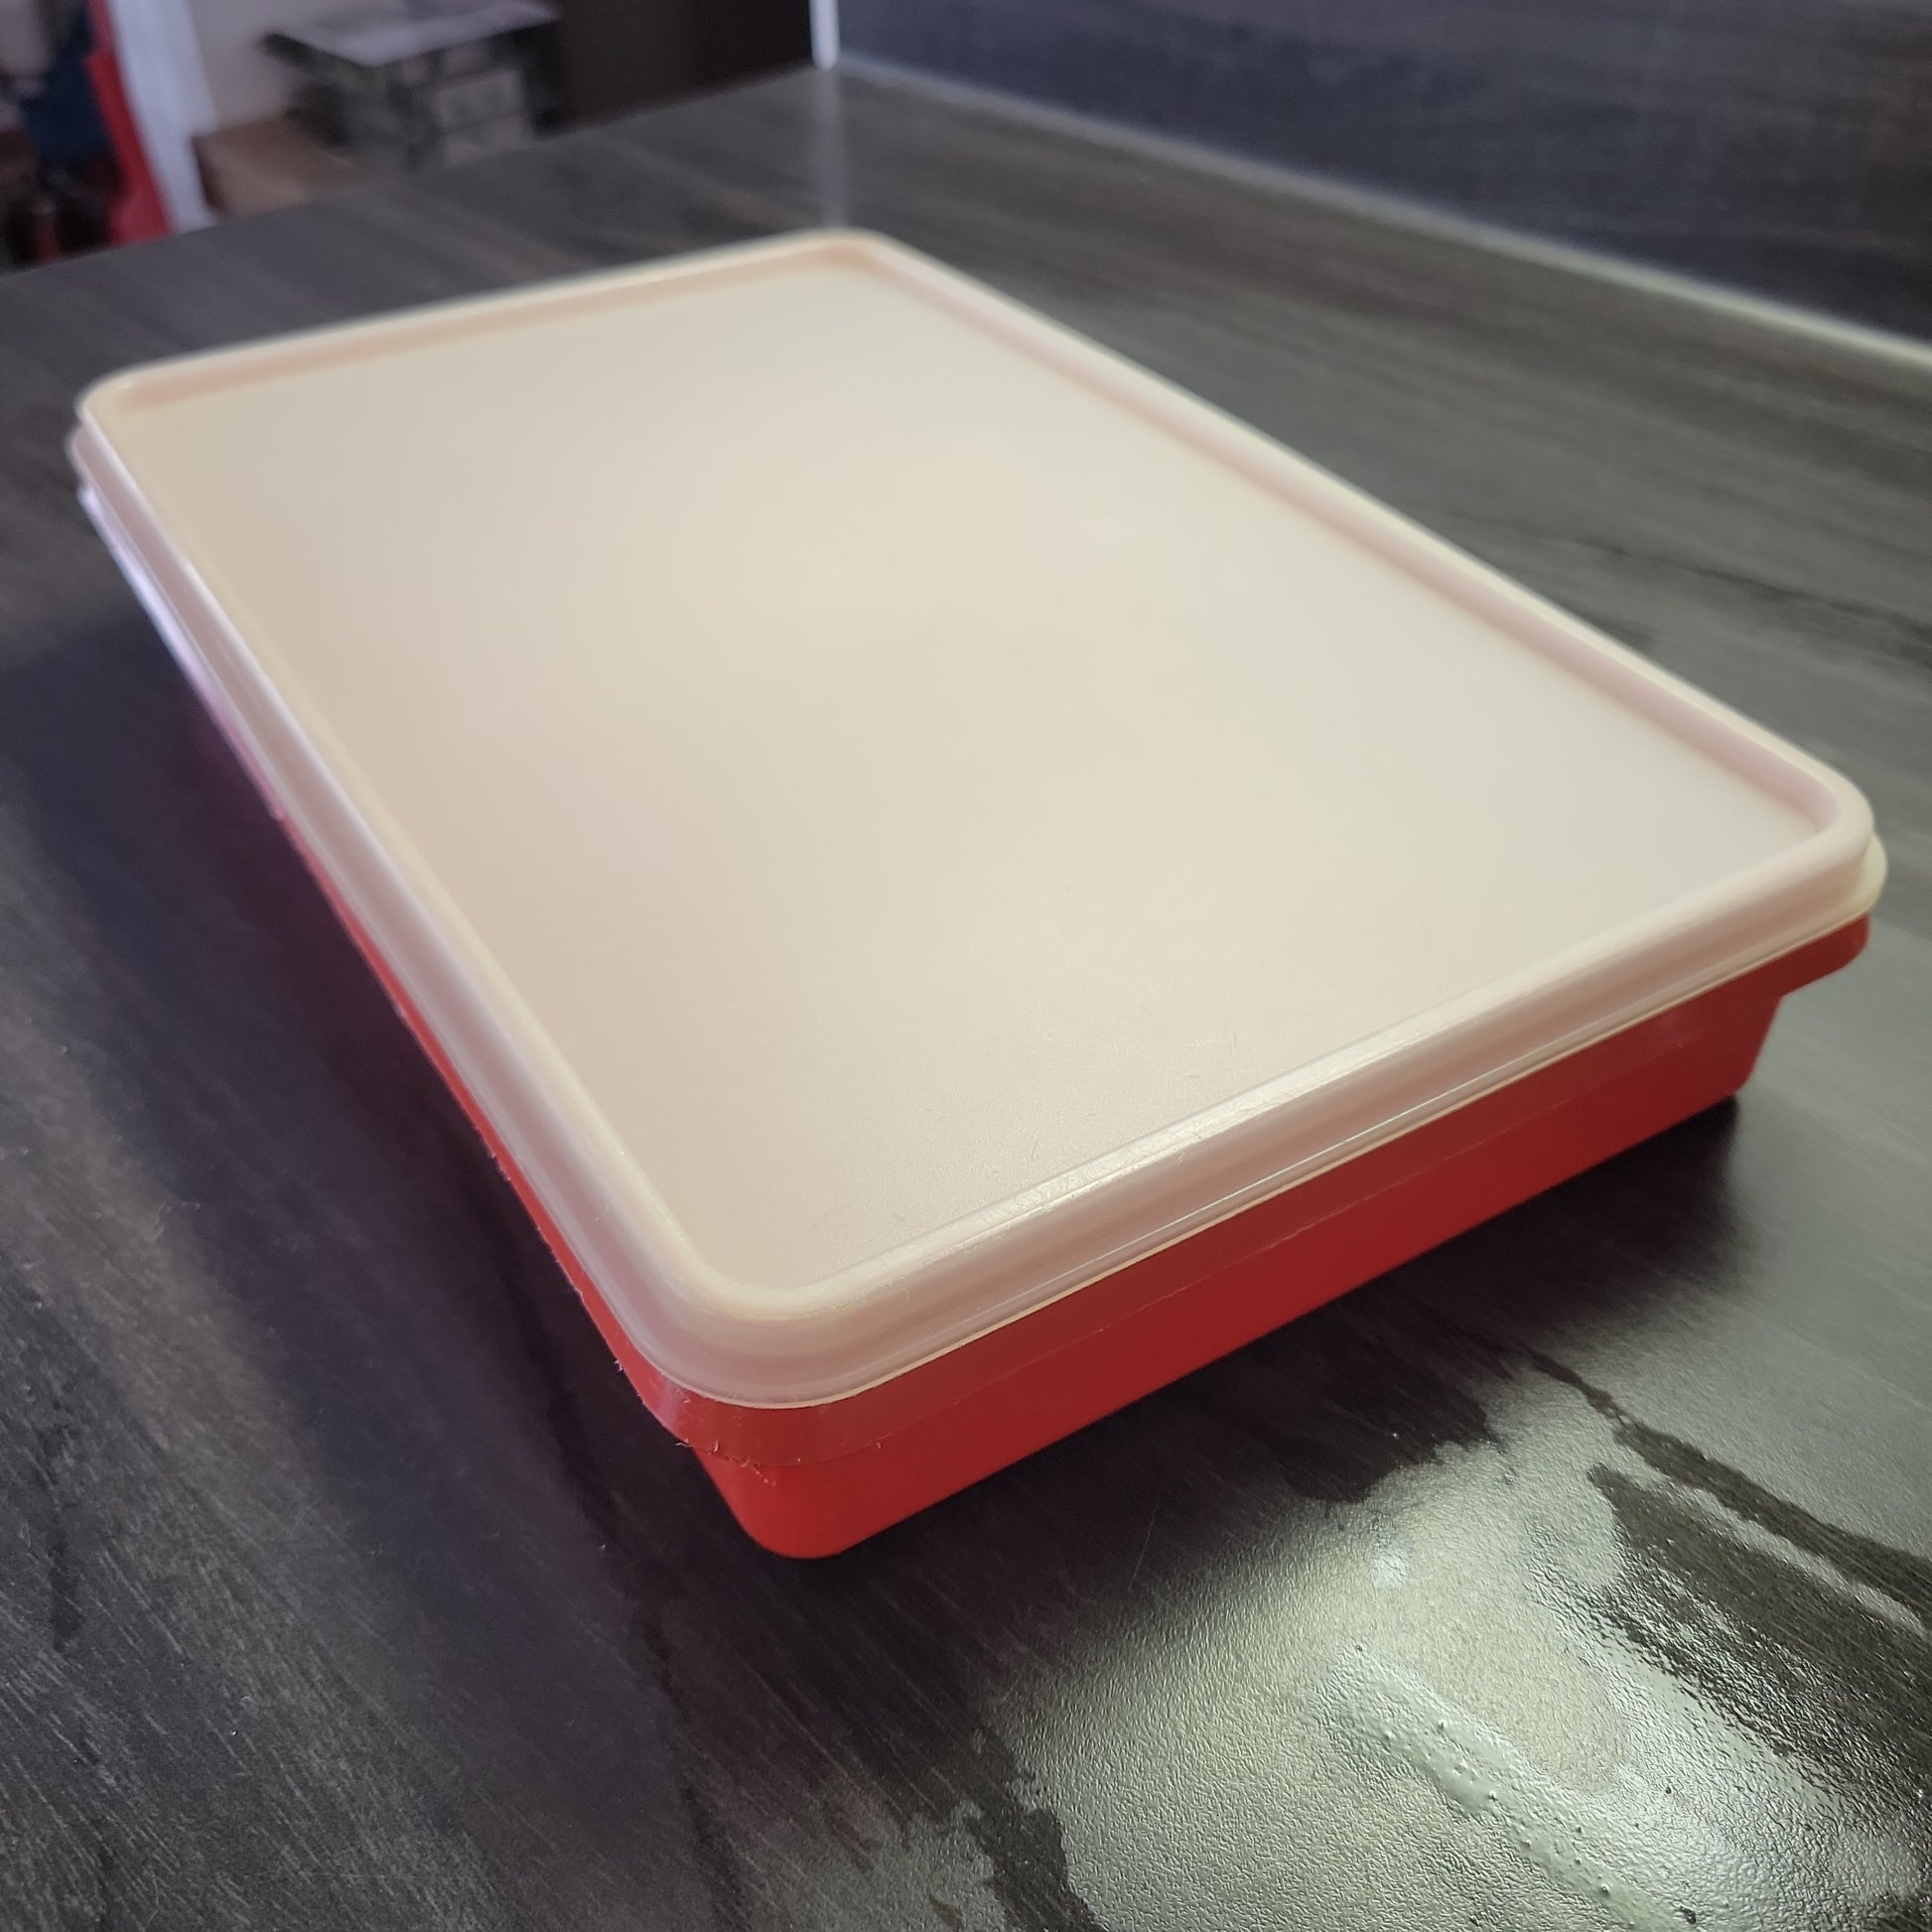 Tupperware 794-7 Bacon Deli Meat Keeper Container Paprika Sheer Lid Vi